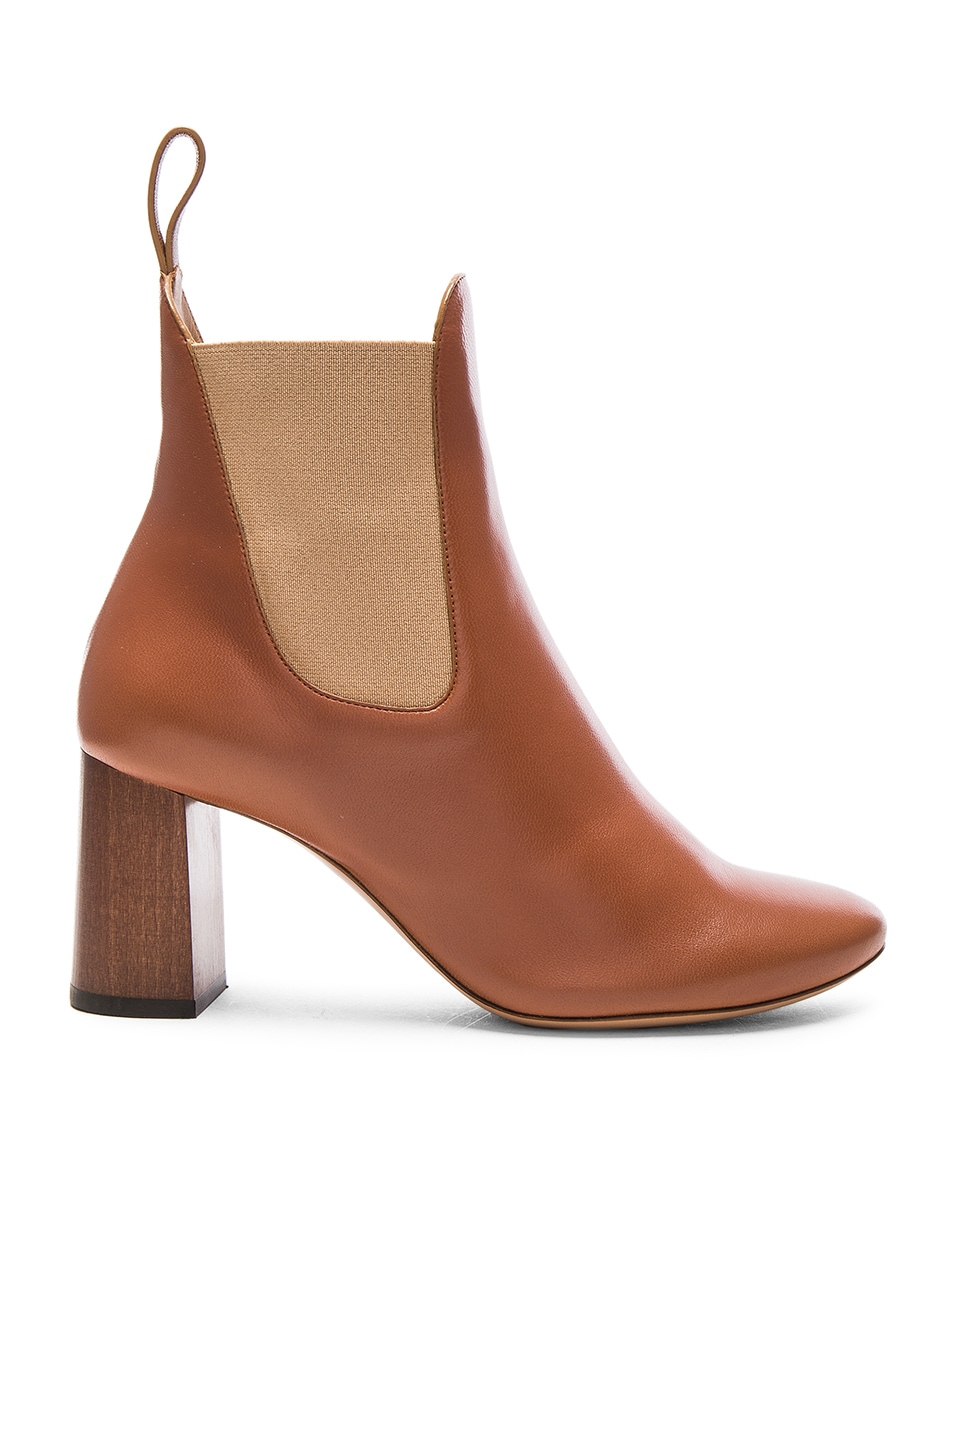 Image 1 of Chloe Leather Harper Ankle Boots in Brown Delight